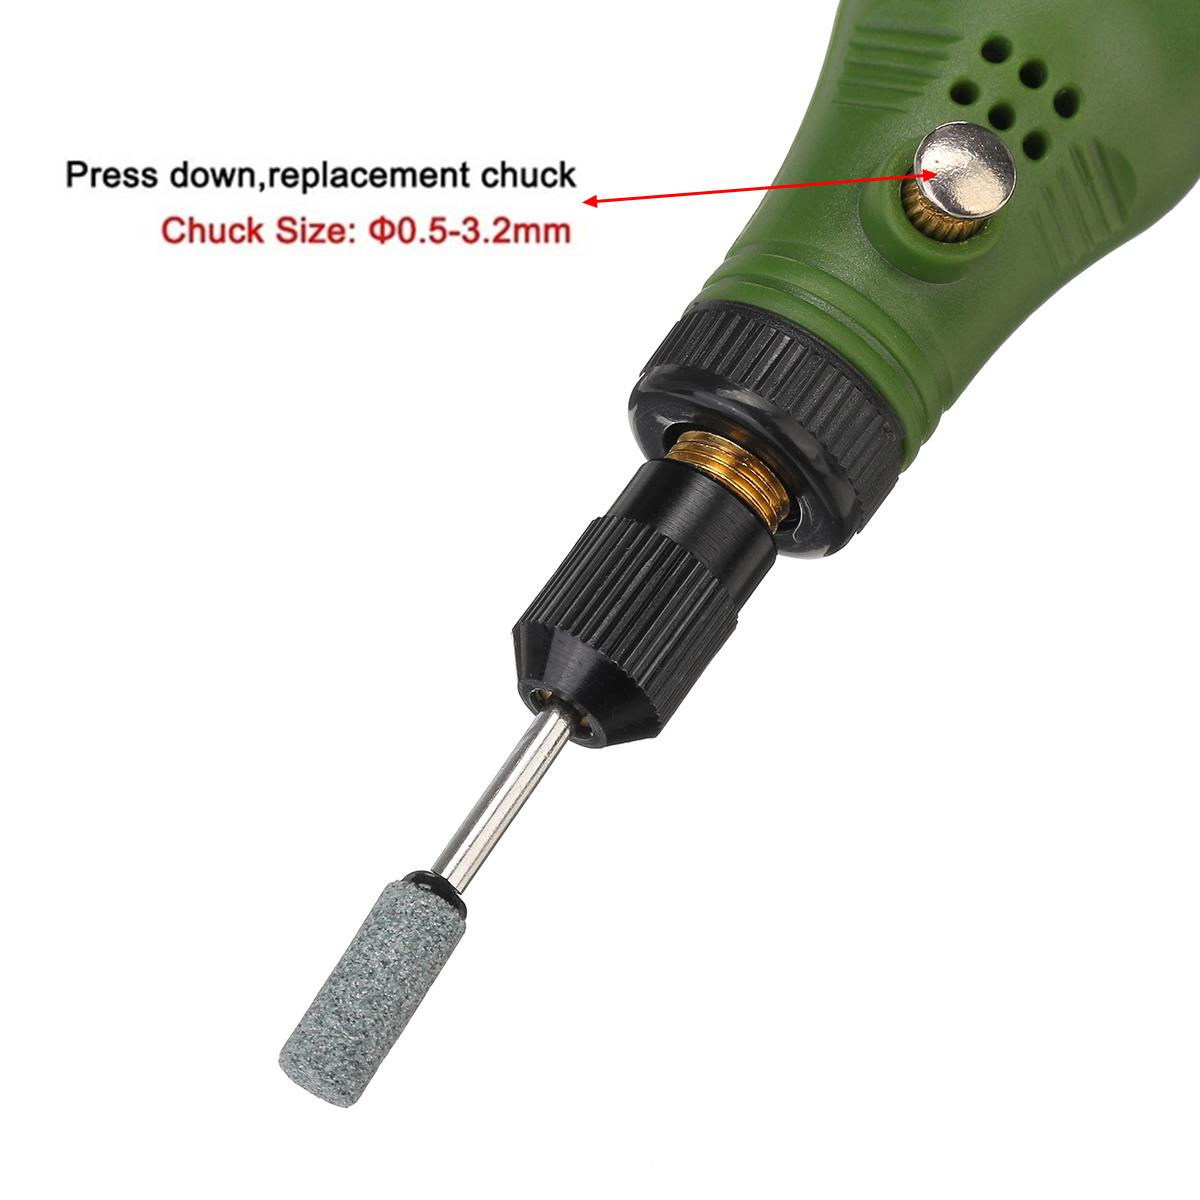 10W-Cordless-Electric-Grinder-Drill-5000-15000rpm-USB-Rotary-Tool-Drill-3-Gears-Grinder-Pen-Engravin-1621850-8